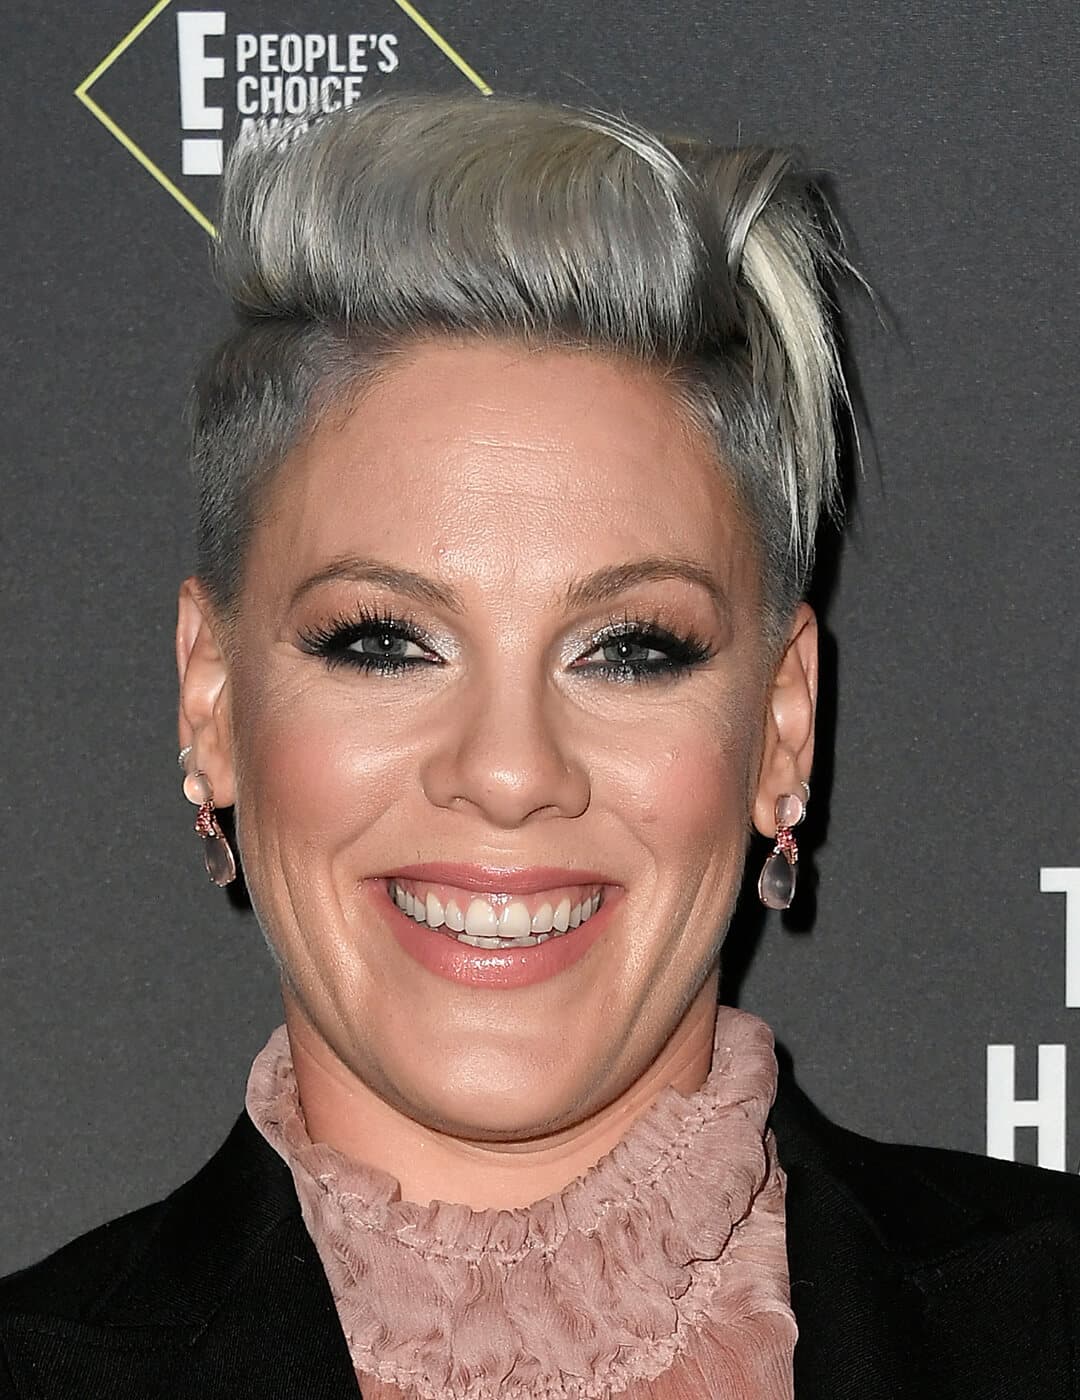 A photo of P!nk with an edgy pixie cut